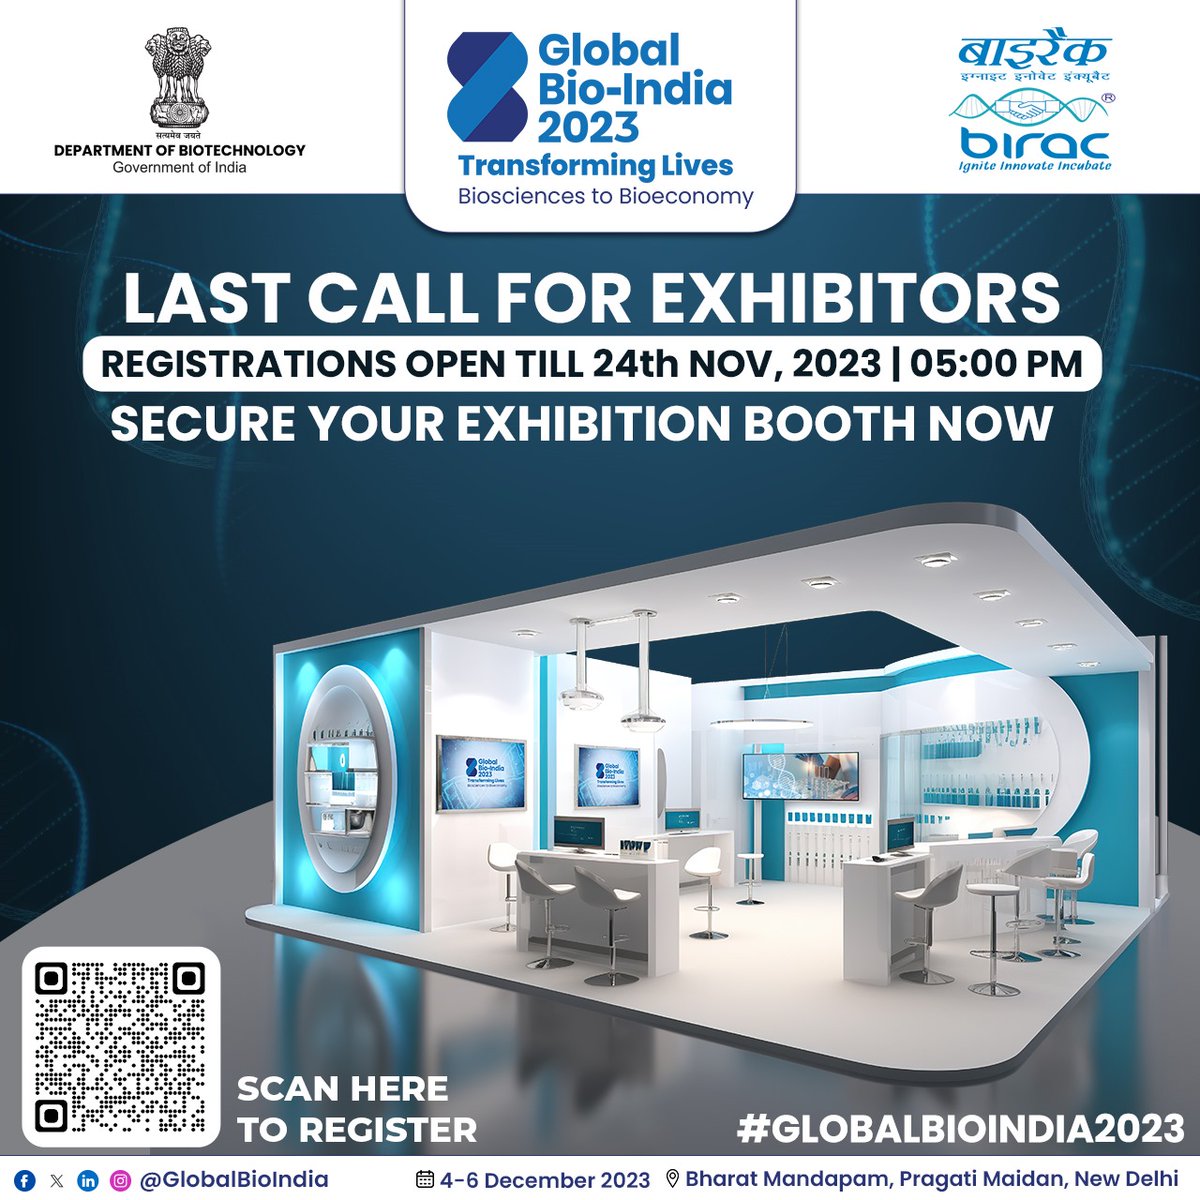 #GlobalBioIndia2023 Last Call for Exhibitors ! Secure your #exhibition spot now! Registrations open till 24th Nov, 2023 | 05:00 PM Register Now: globalbioindia.org/registration Join us from 4-6 Dec, 2023 at Bharat Mandapam , Pragati Maidan, New Delhi